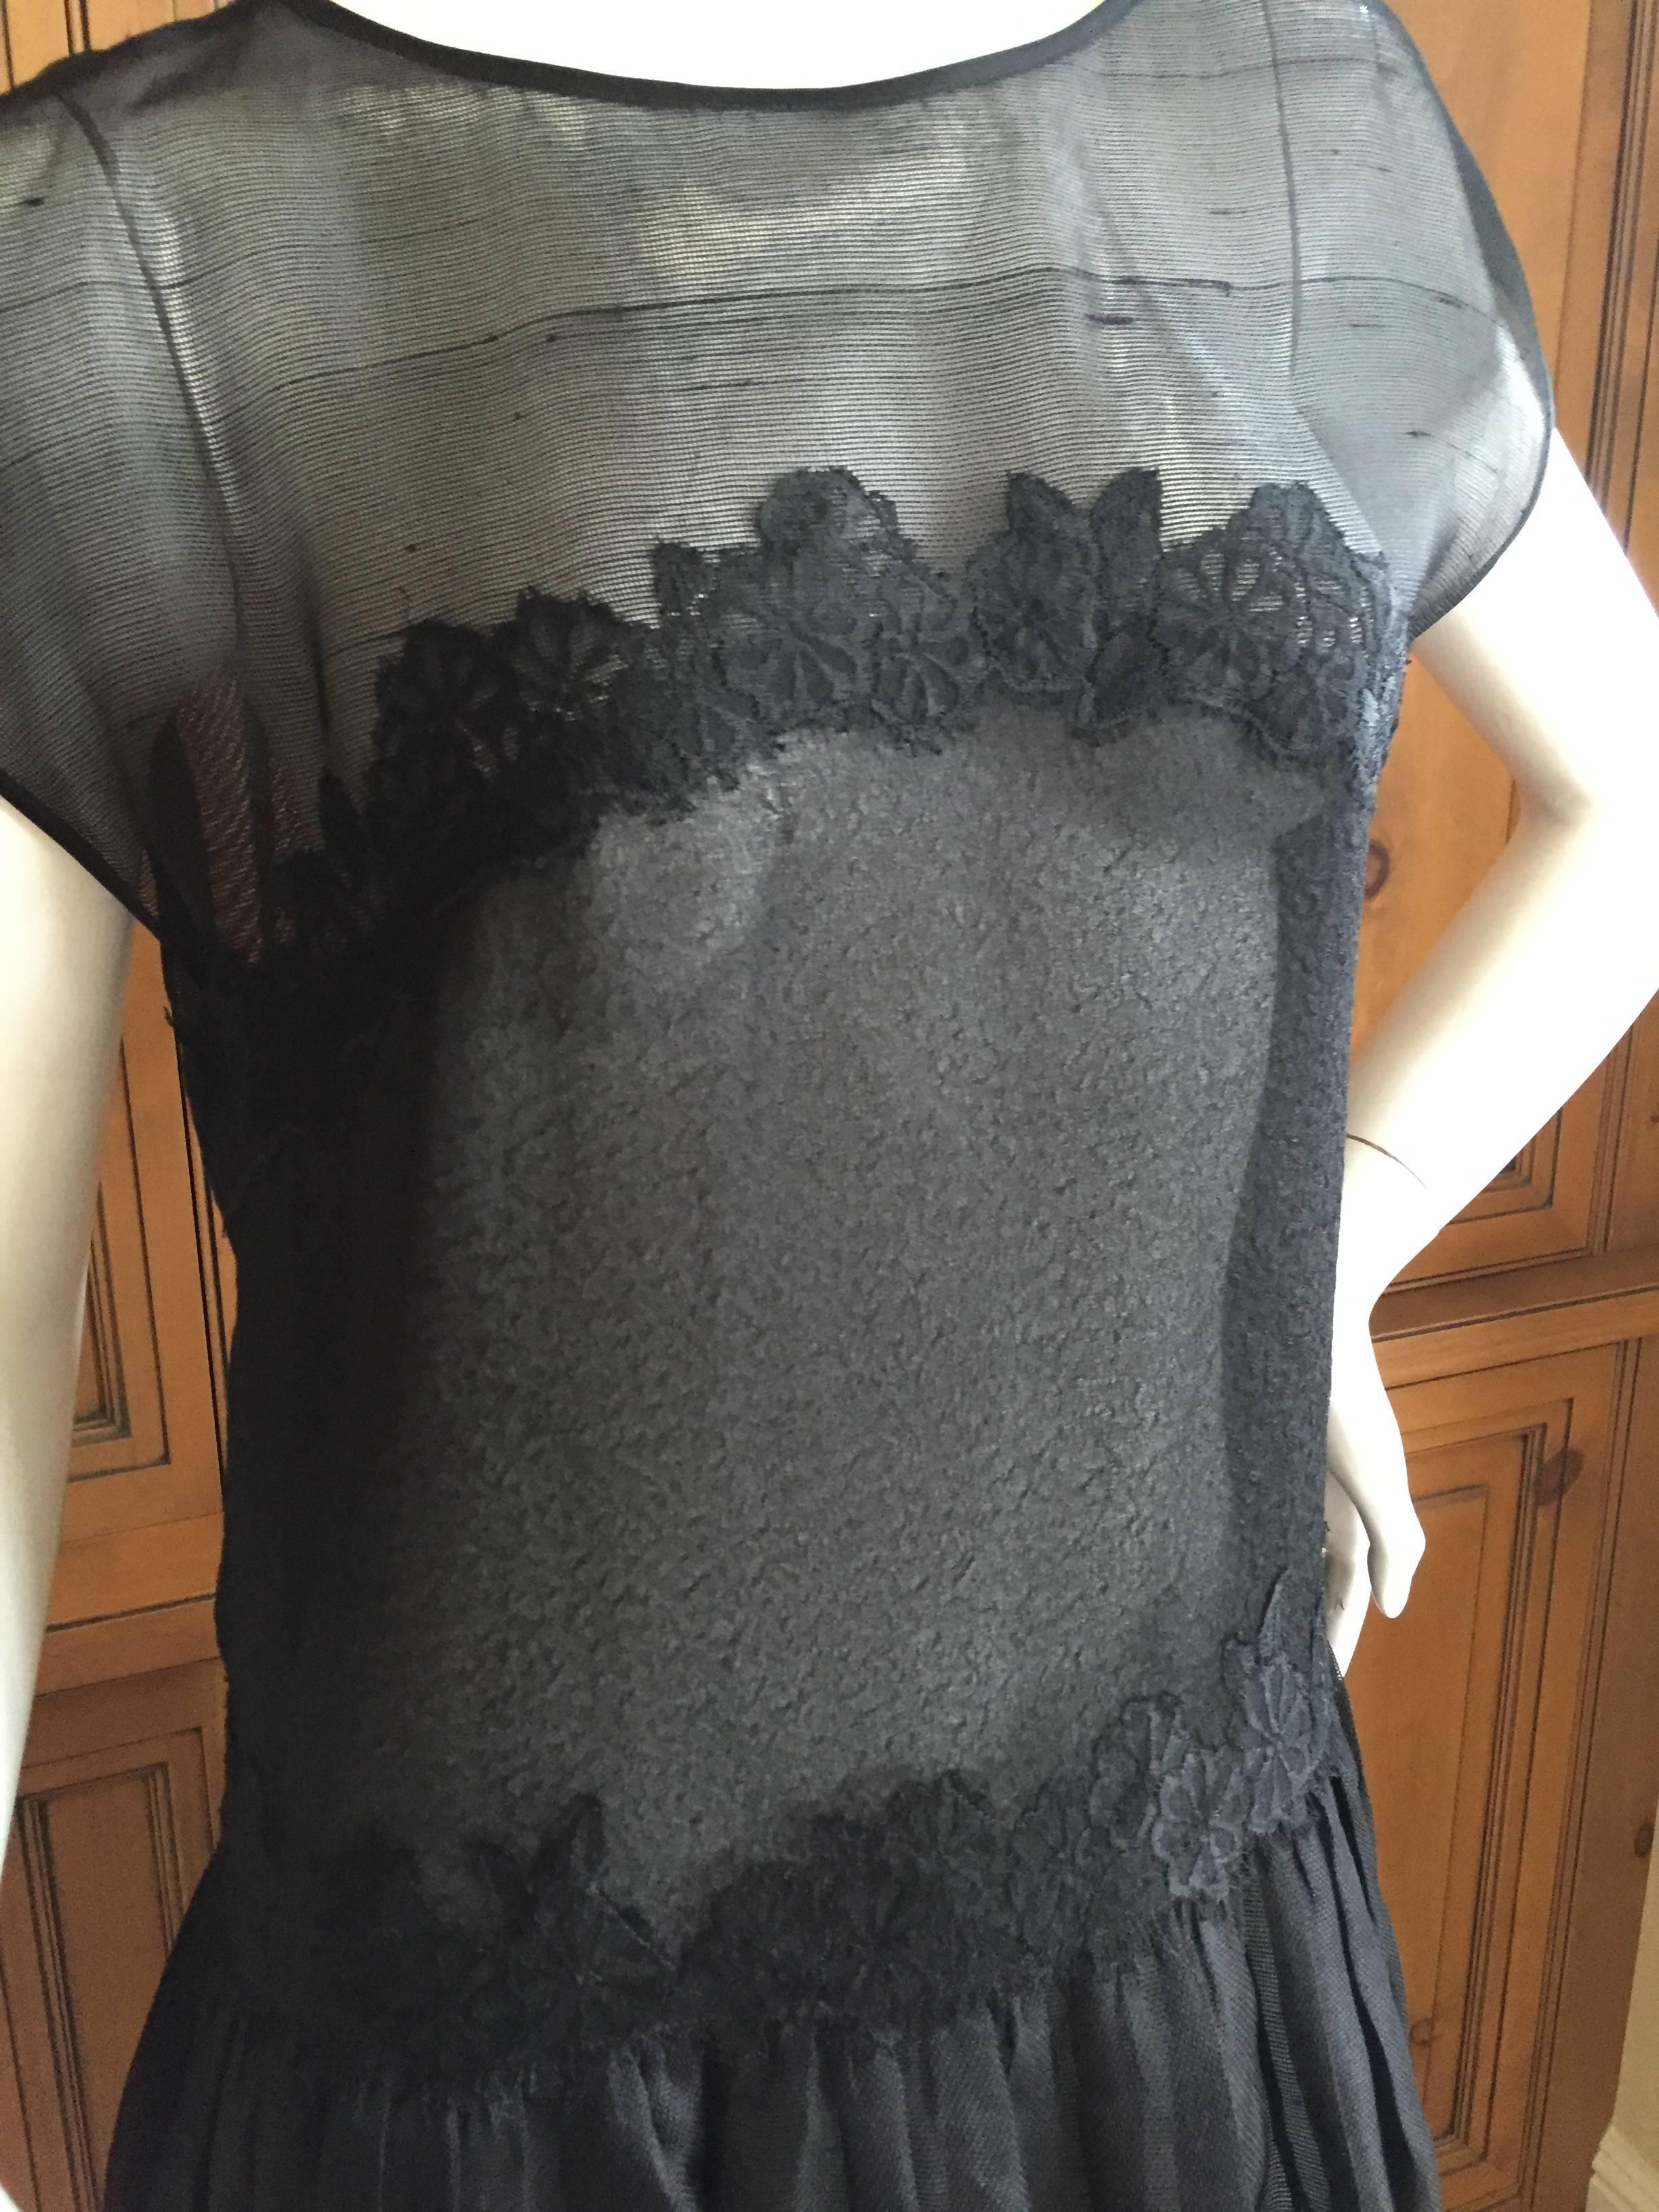 Geoffrey Beene Sheer Black Lace Dress In Excellent Condition For Sale In Cloverdale, CA